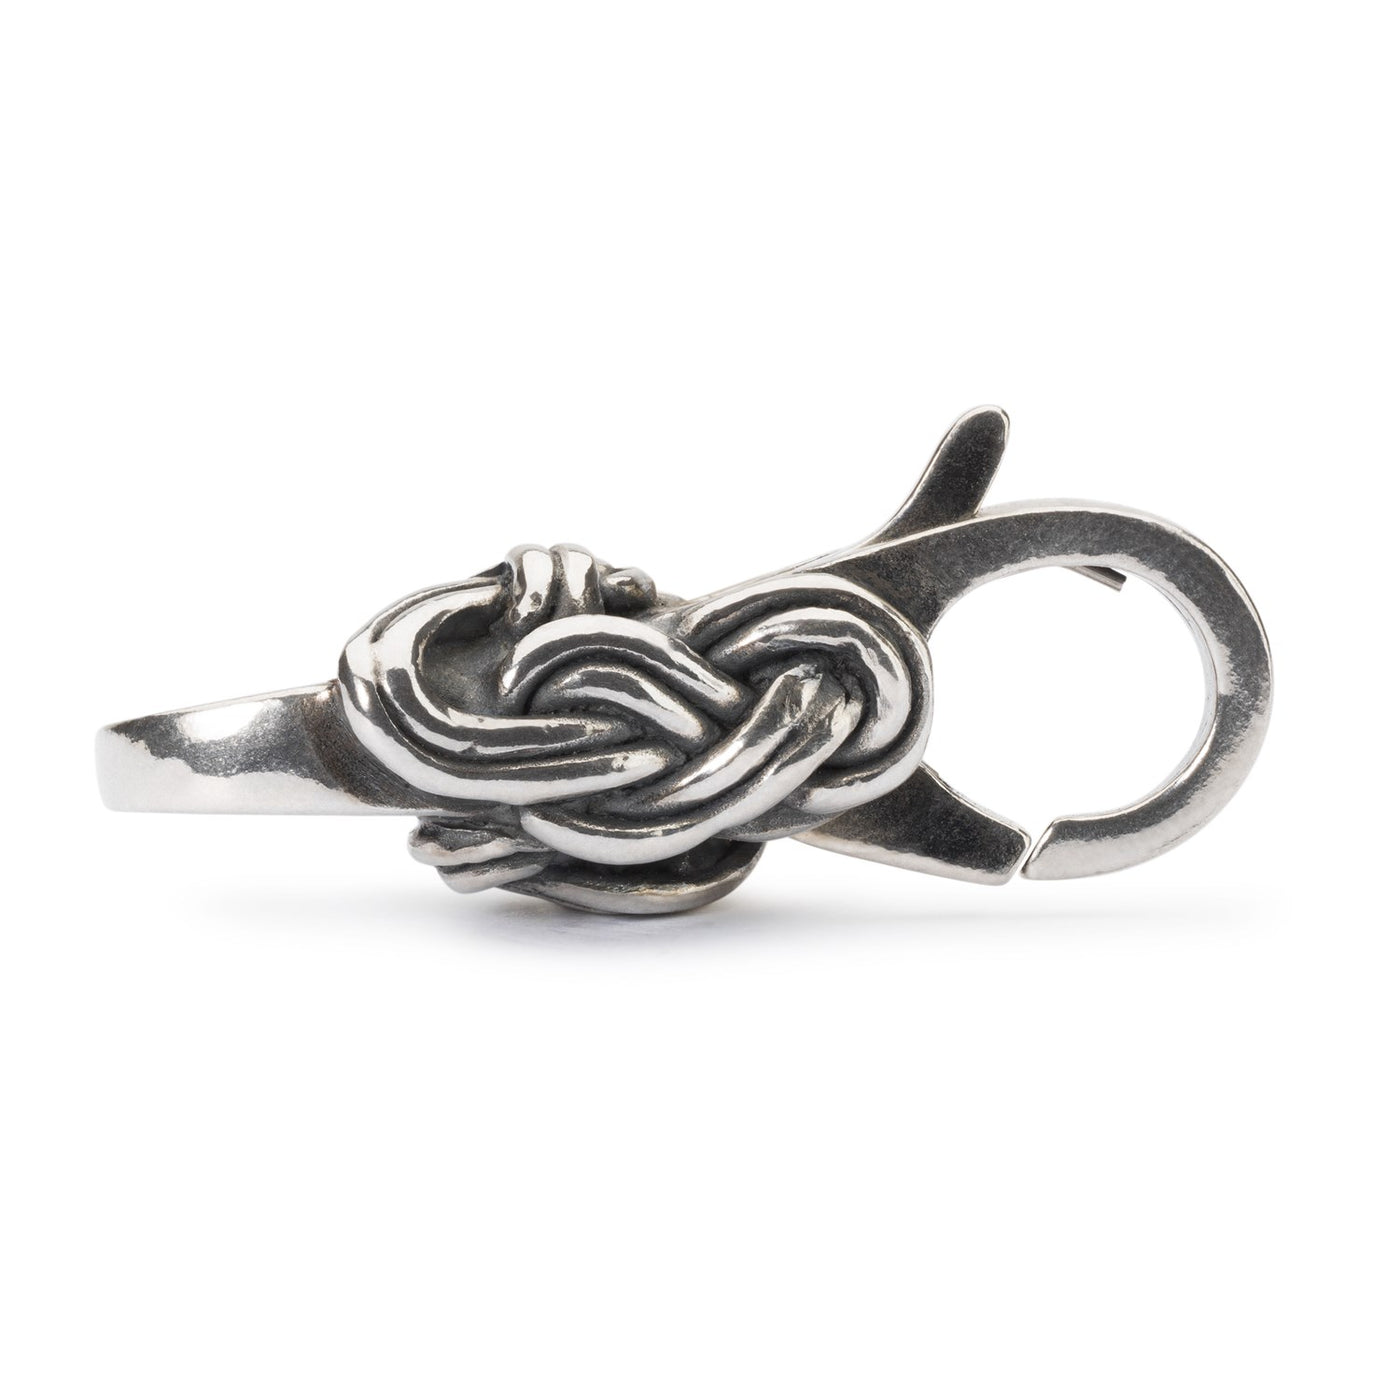 Savoy Knot Clasp - a sterling silver clasp in the shape of a decorative knot, adding a touch of intricate detail to your Trollbeads bracelet.